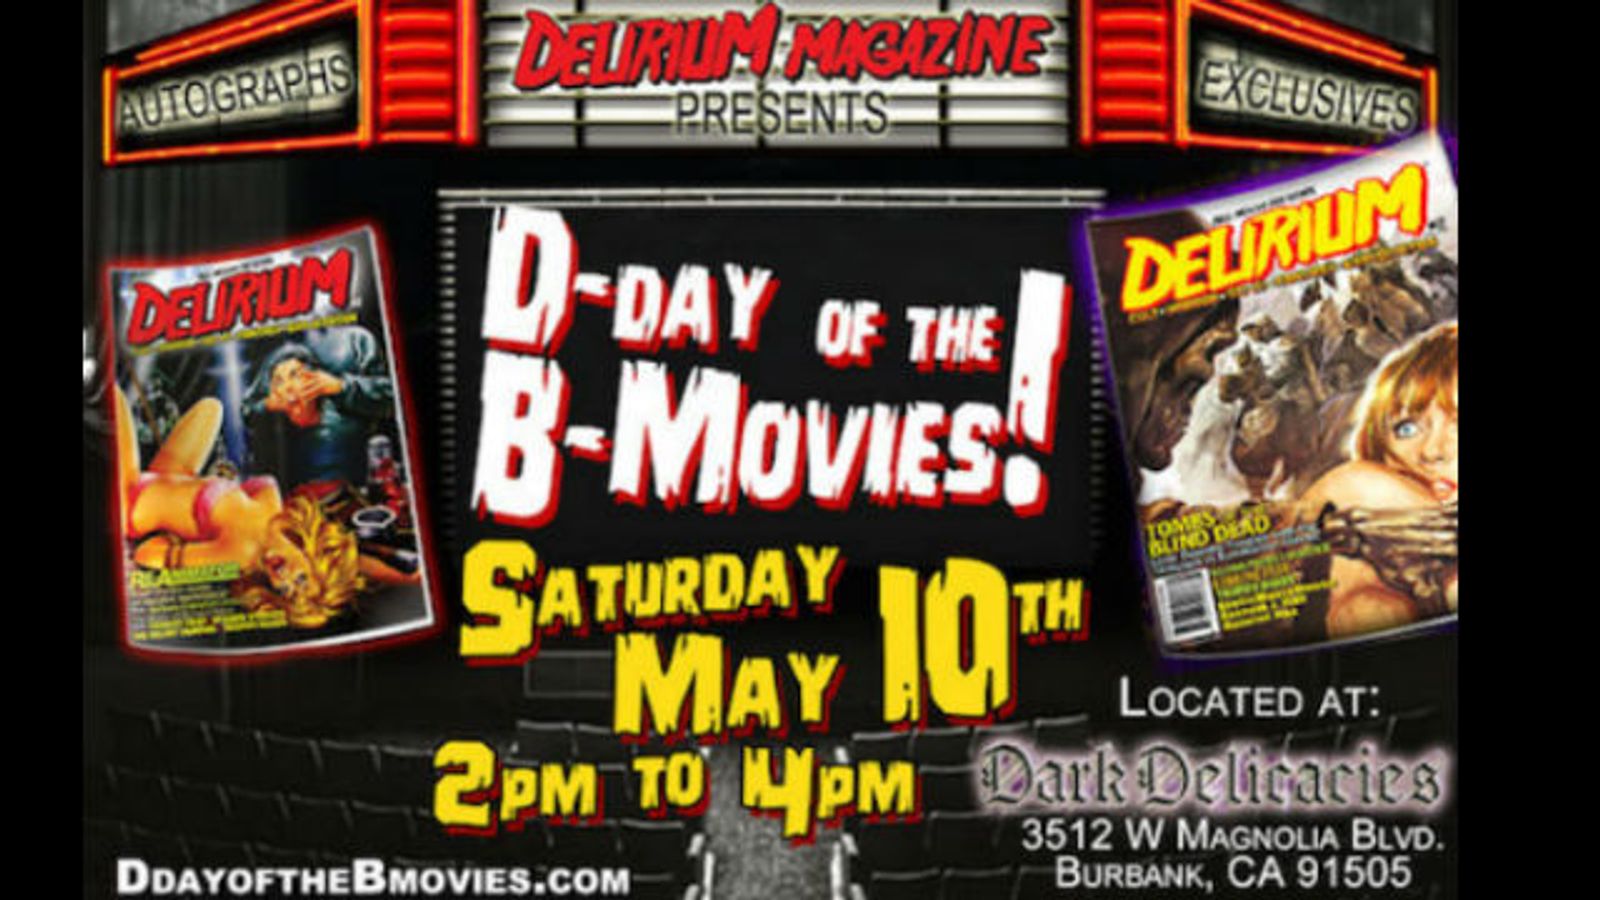 Siri to Appear at Delirium Magazine Event in Burbank, May 10